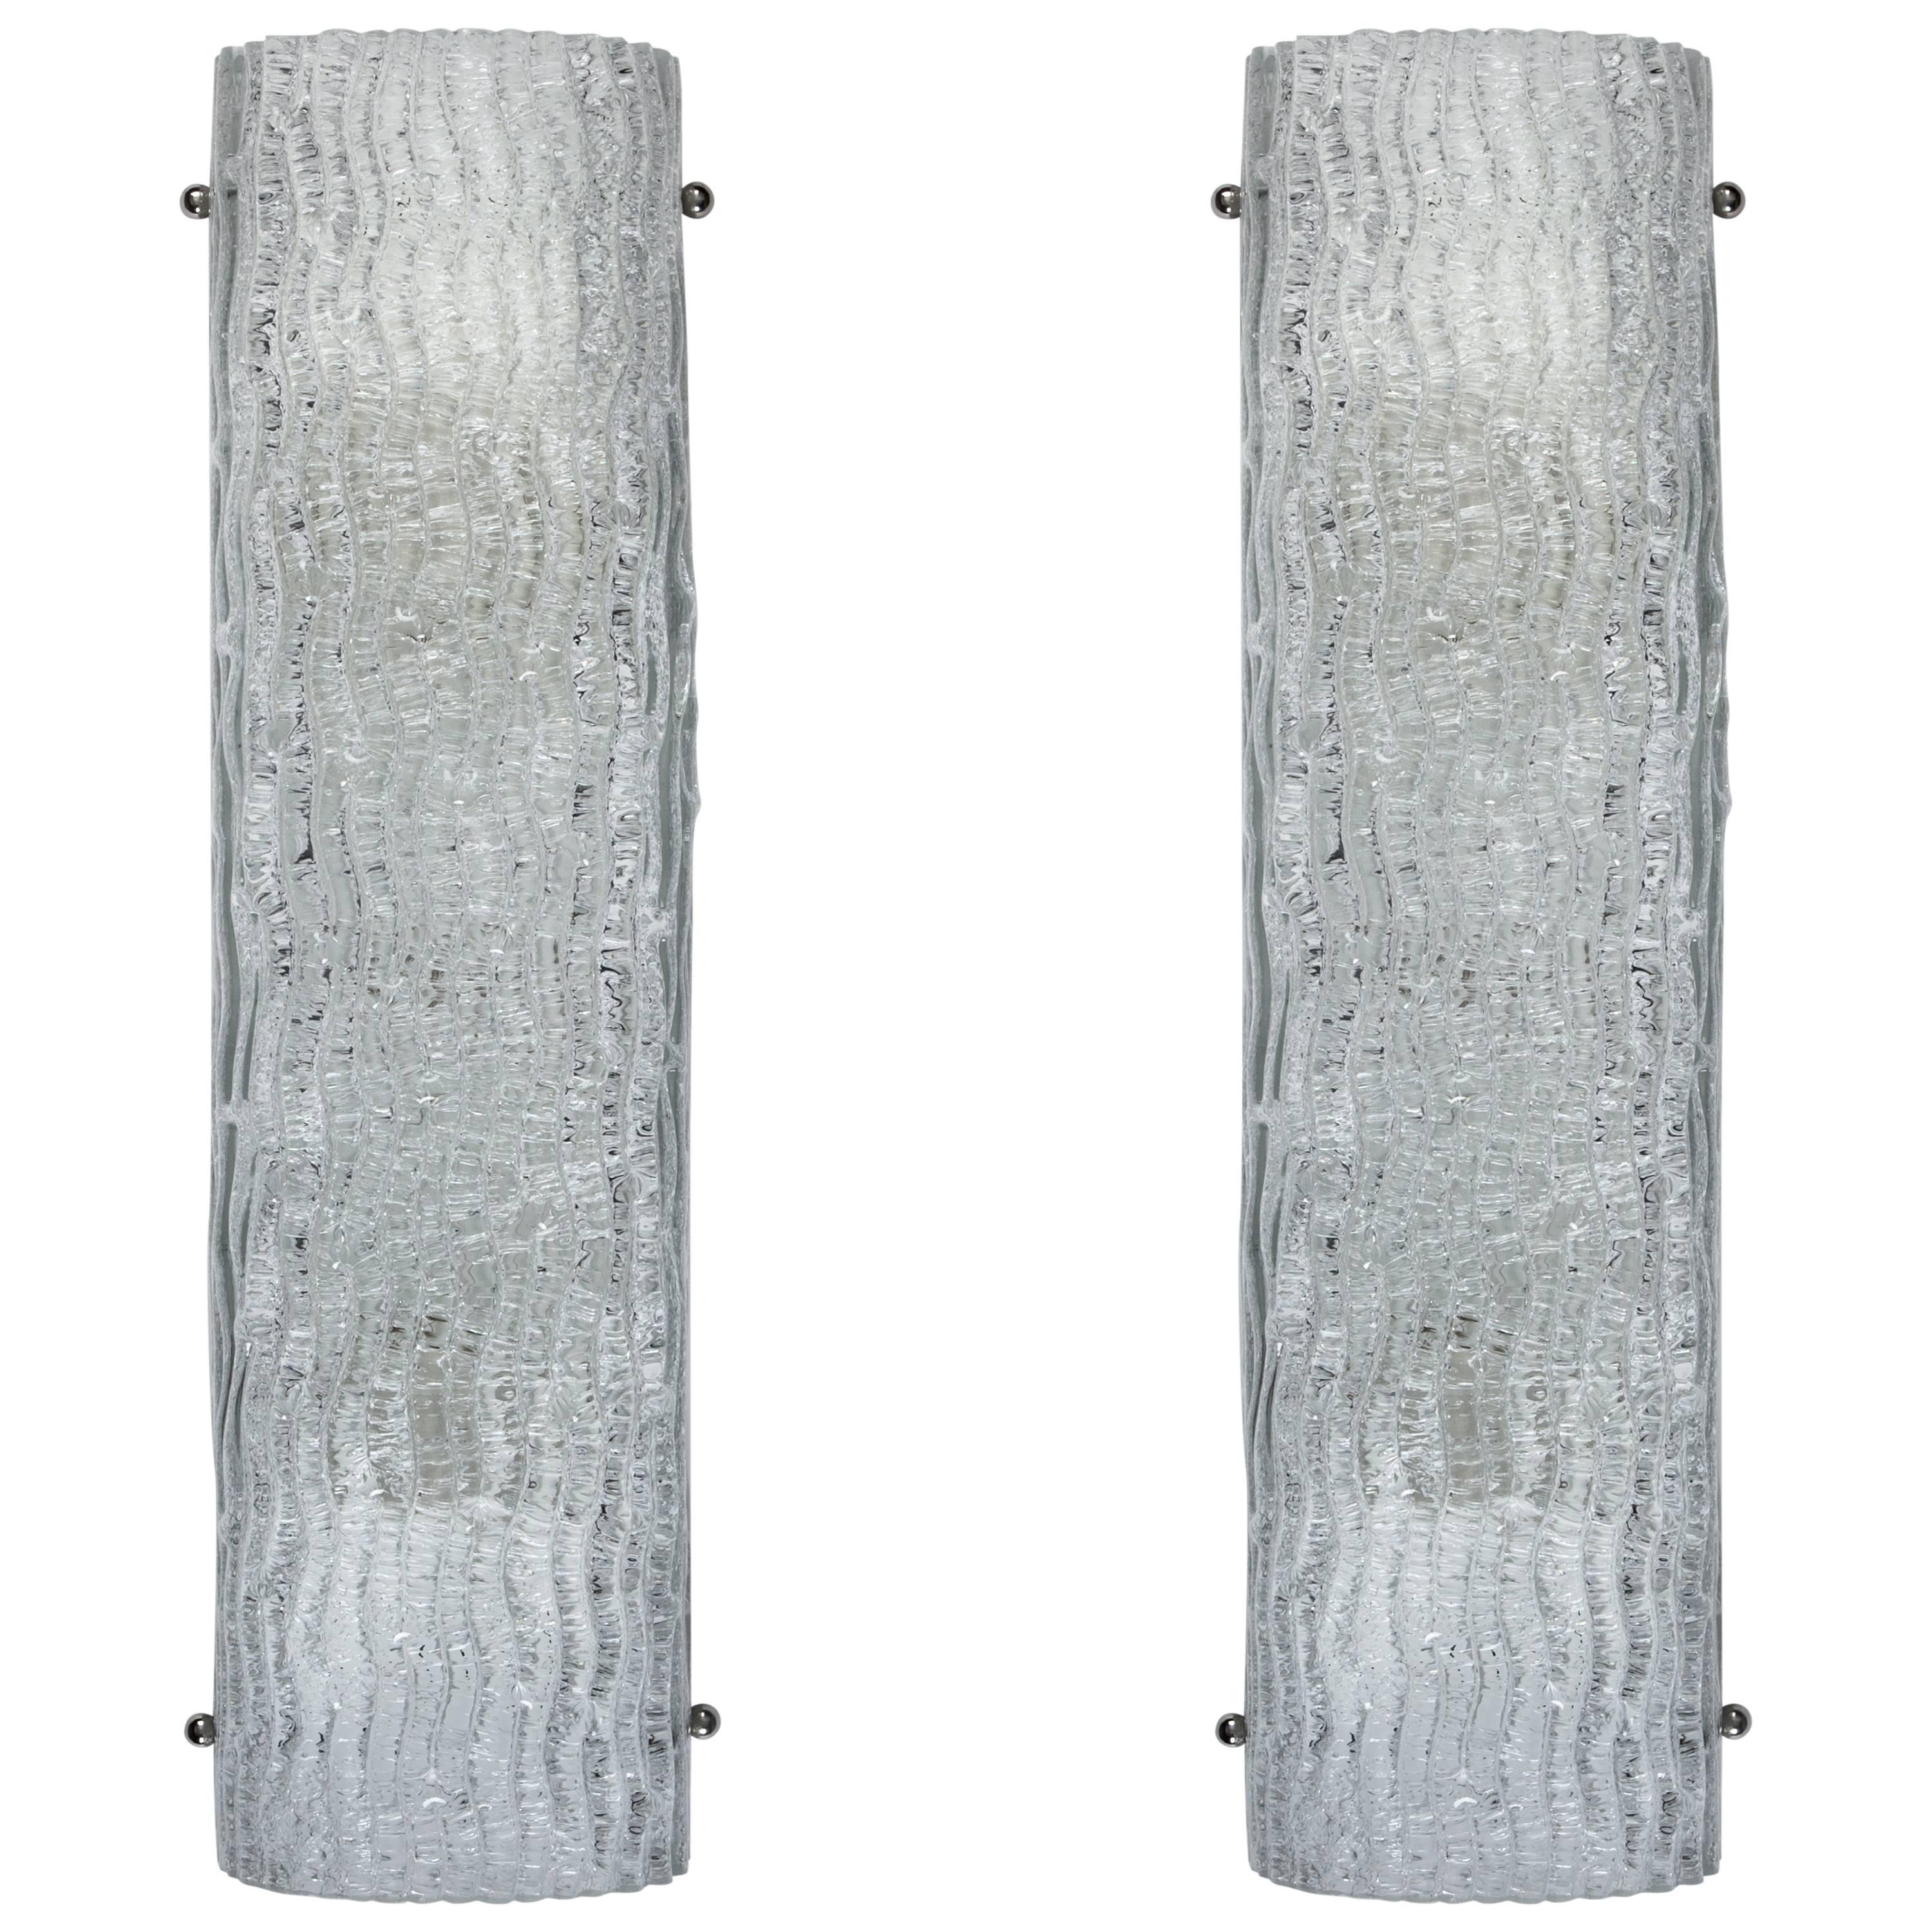 Large Mid-Century Italian Glass Sconces with Textured Wave Pattern Circa 1960s For Sale